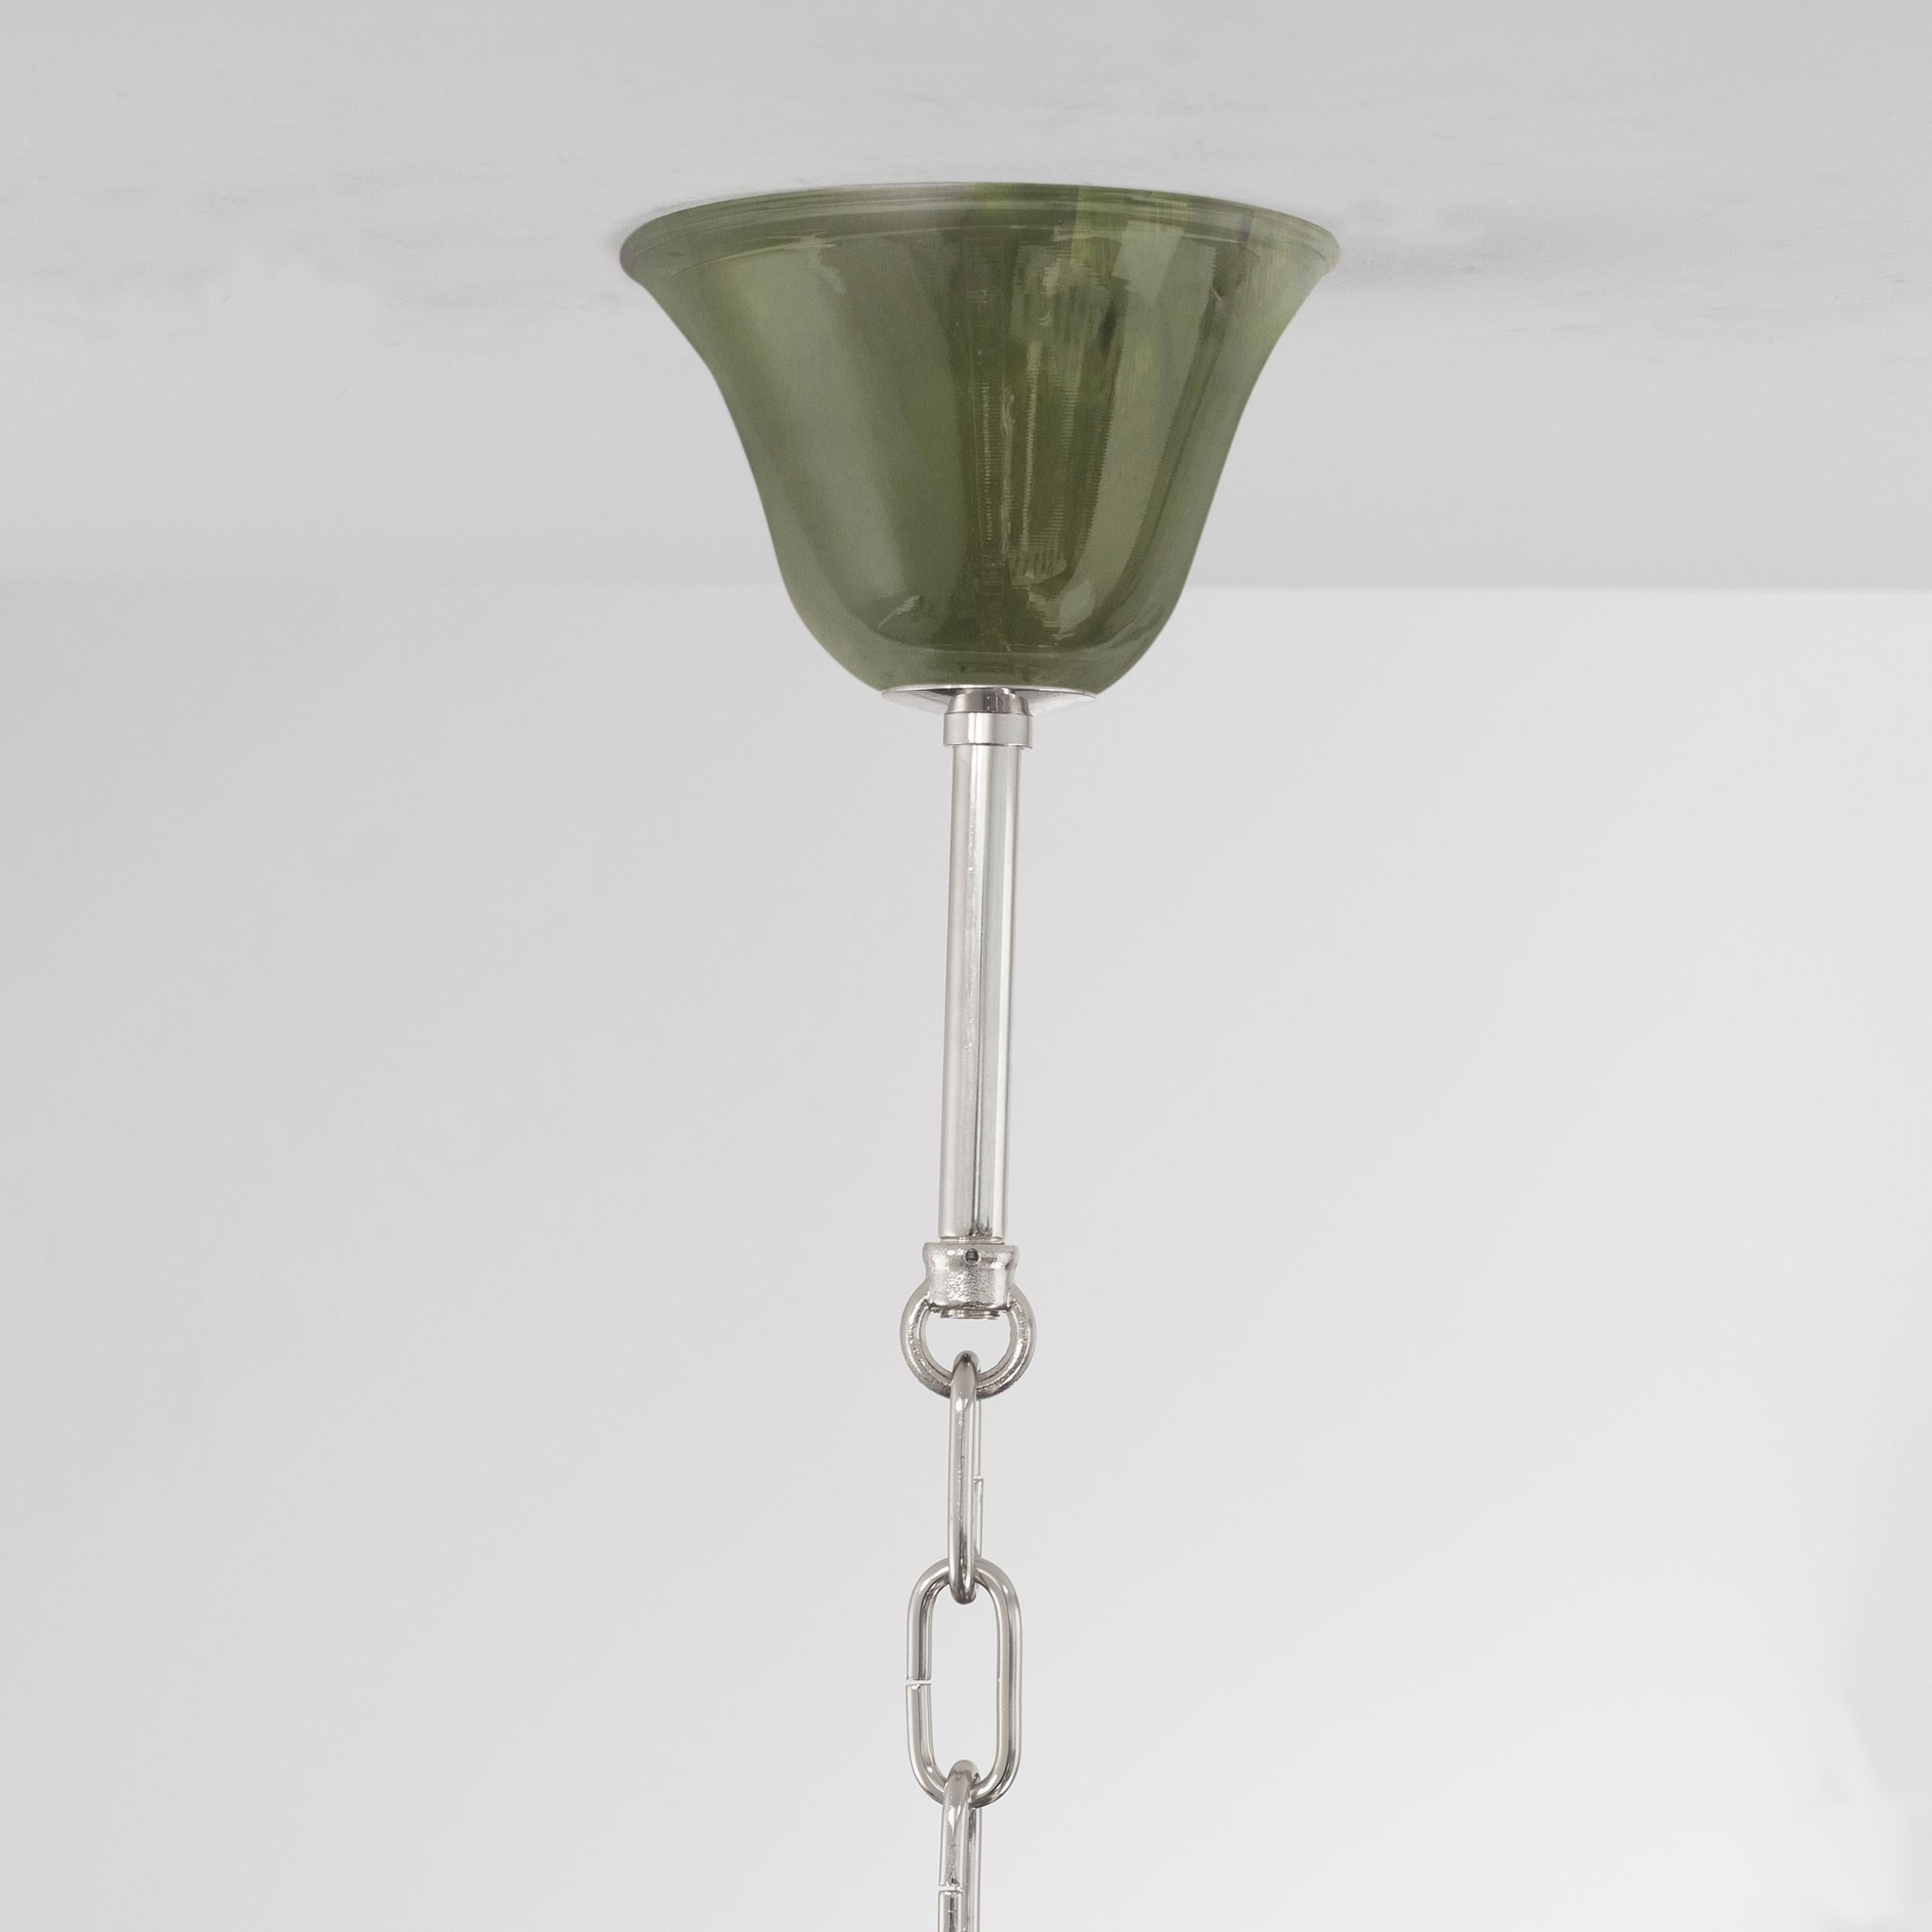 Venetian Chandelier 5 Arms Olive Green Murano Glass Simplicissimus by Multiforme For Sale 1